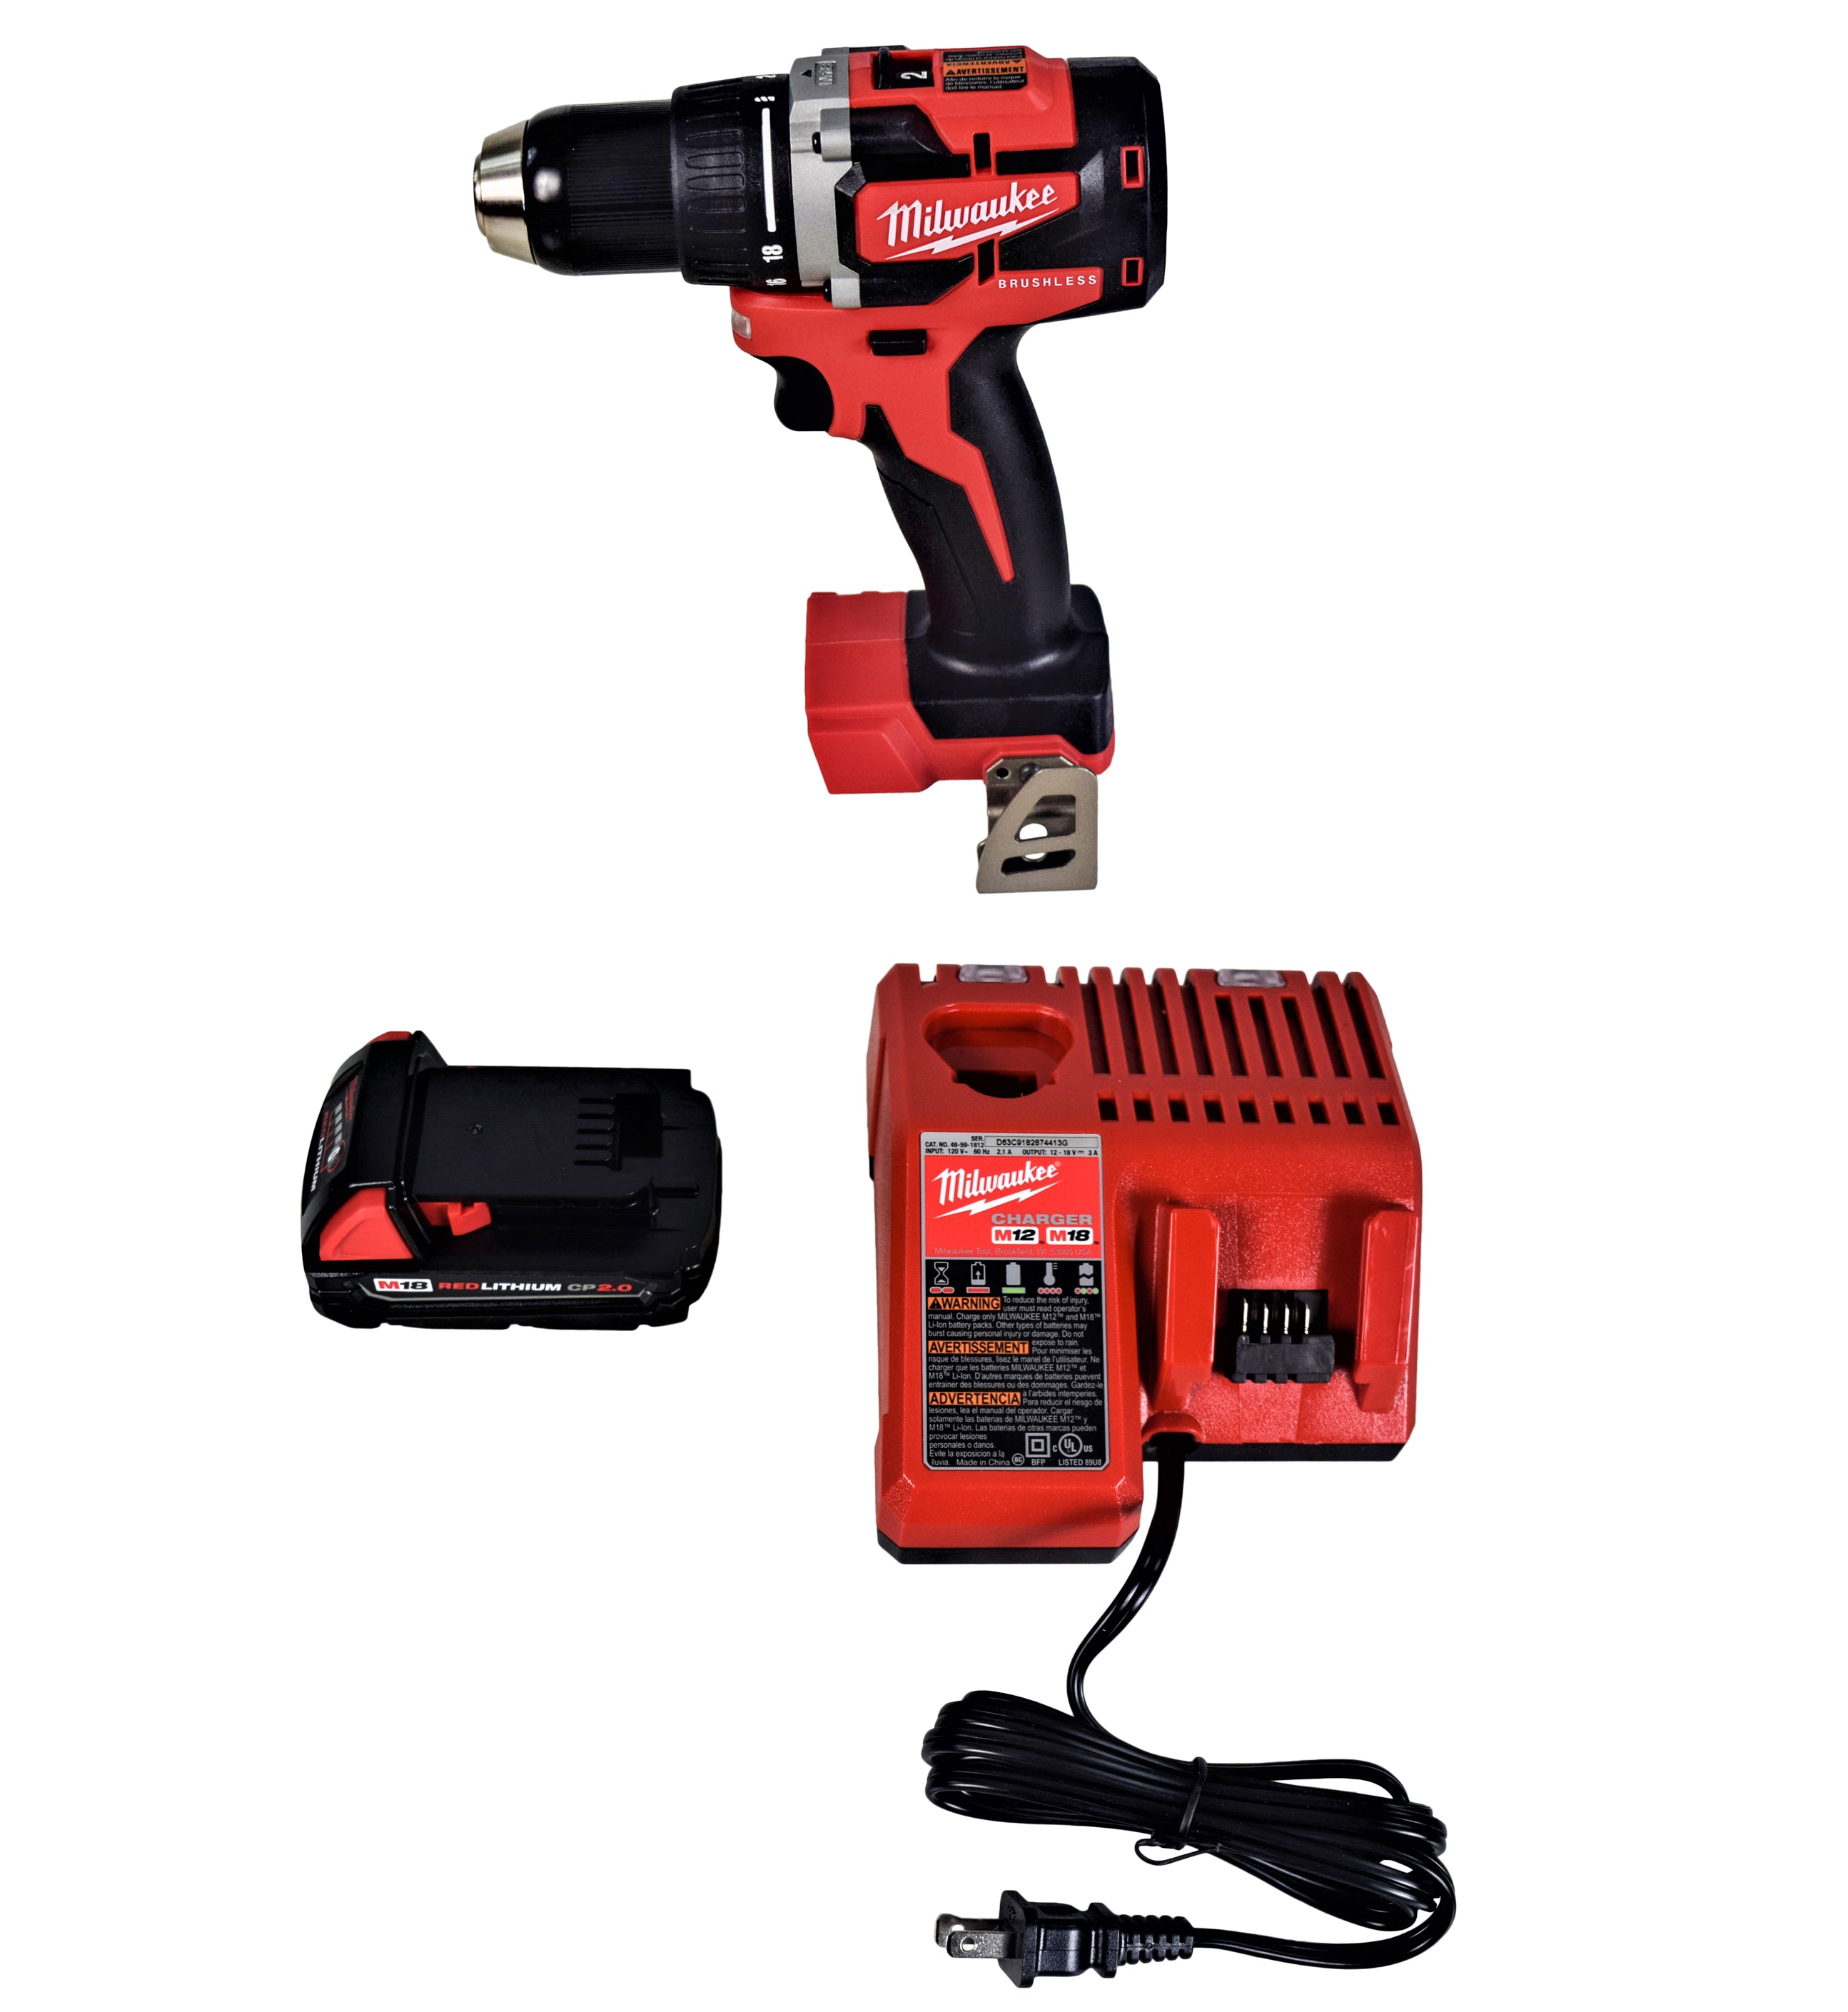 Milwaukee-2801-21P-M18-18-Volt-Lithium-Ion-Compact-Brushless-Cordless-1-2-in.-Drill-Driver-Kit-image-2